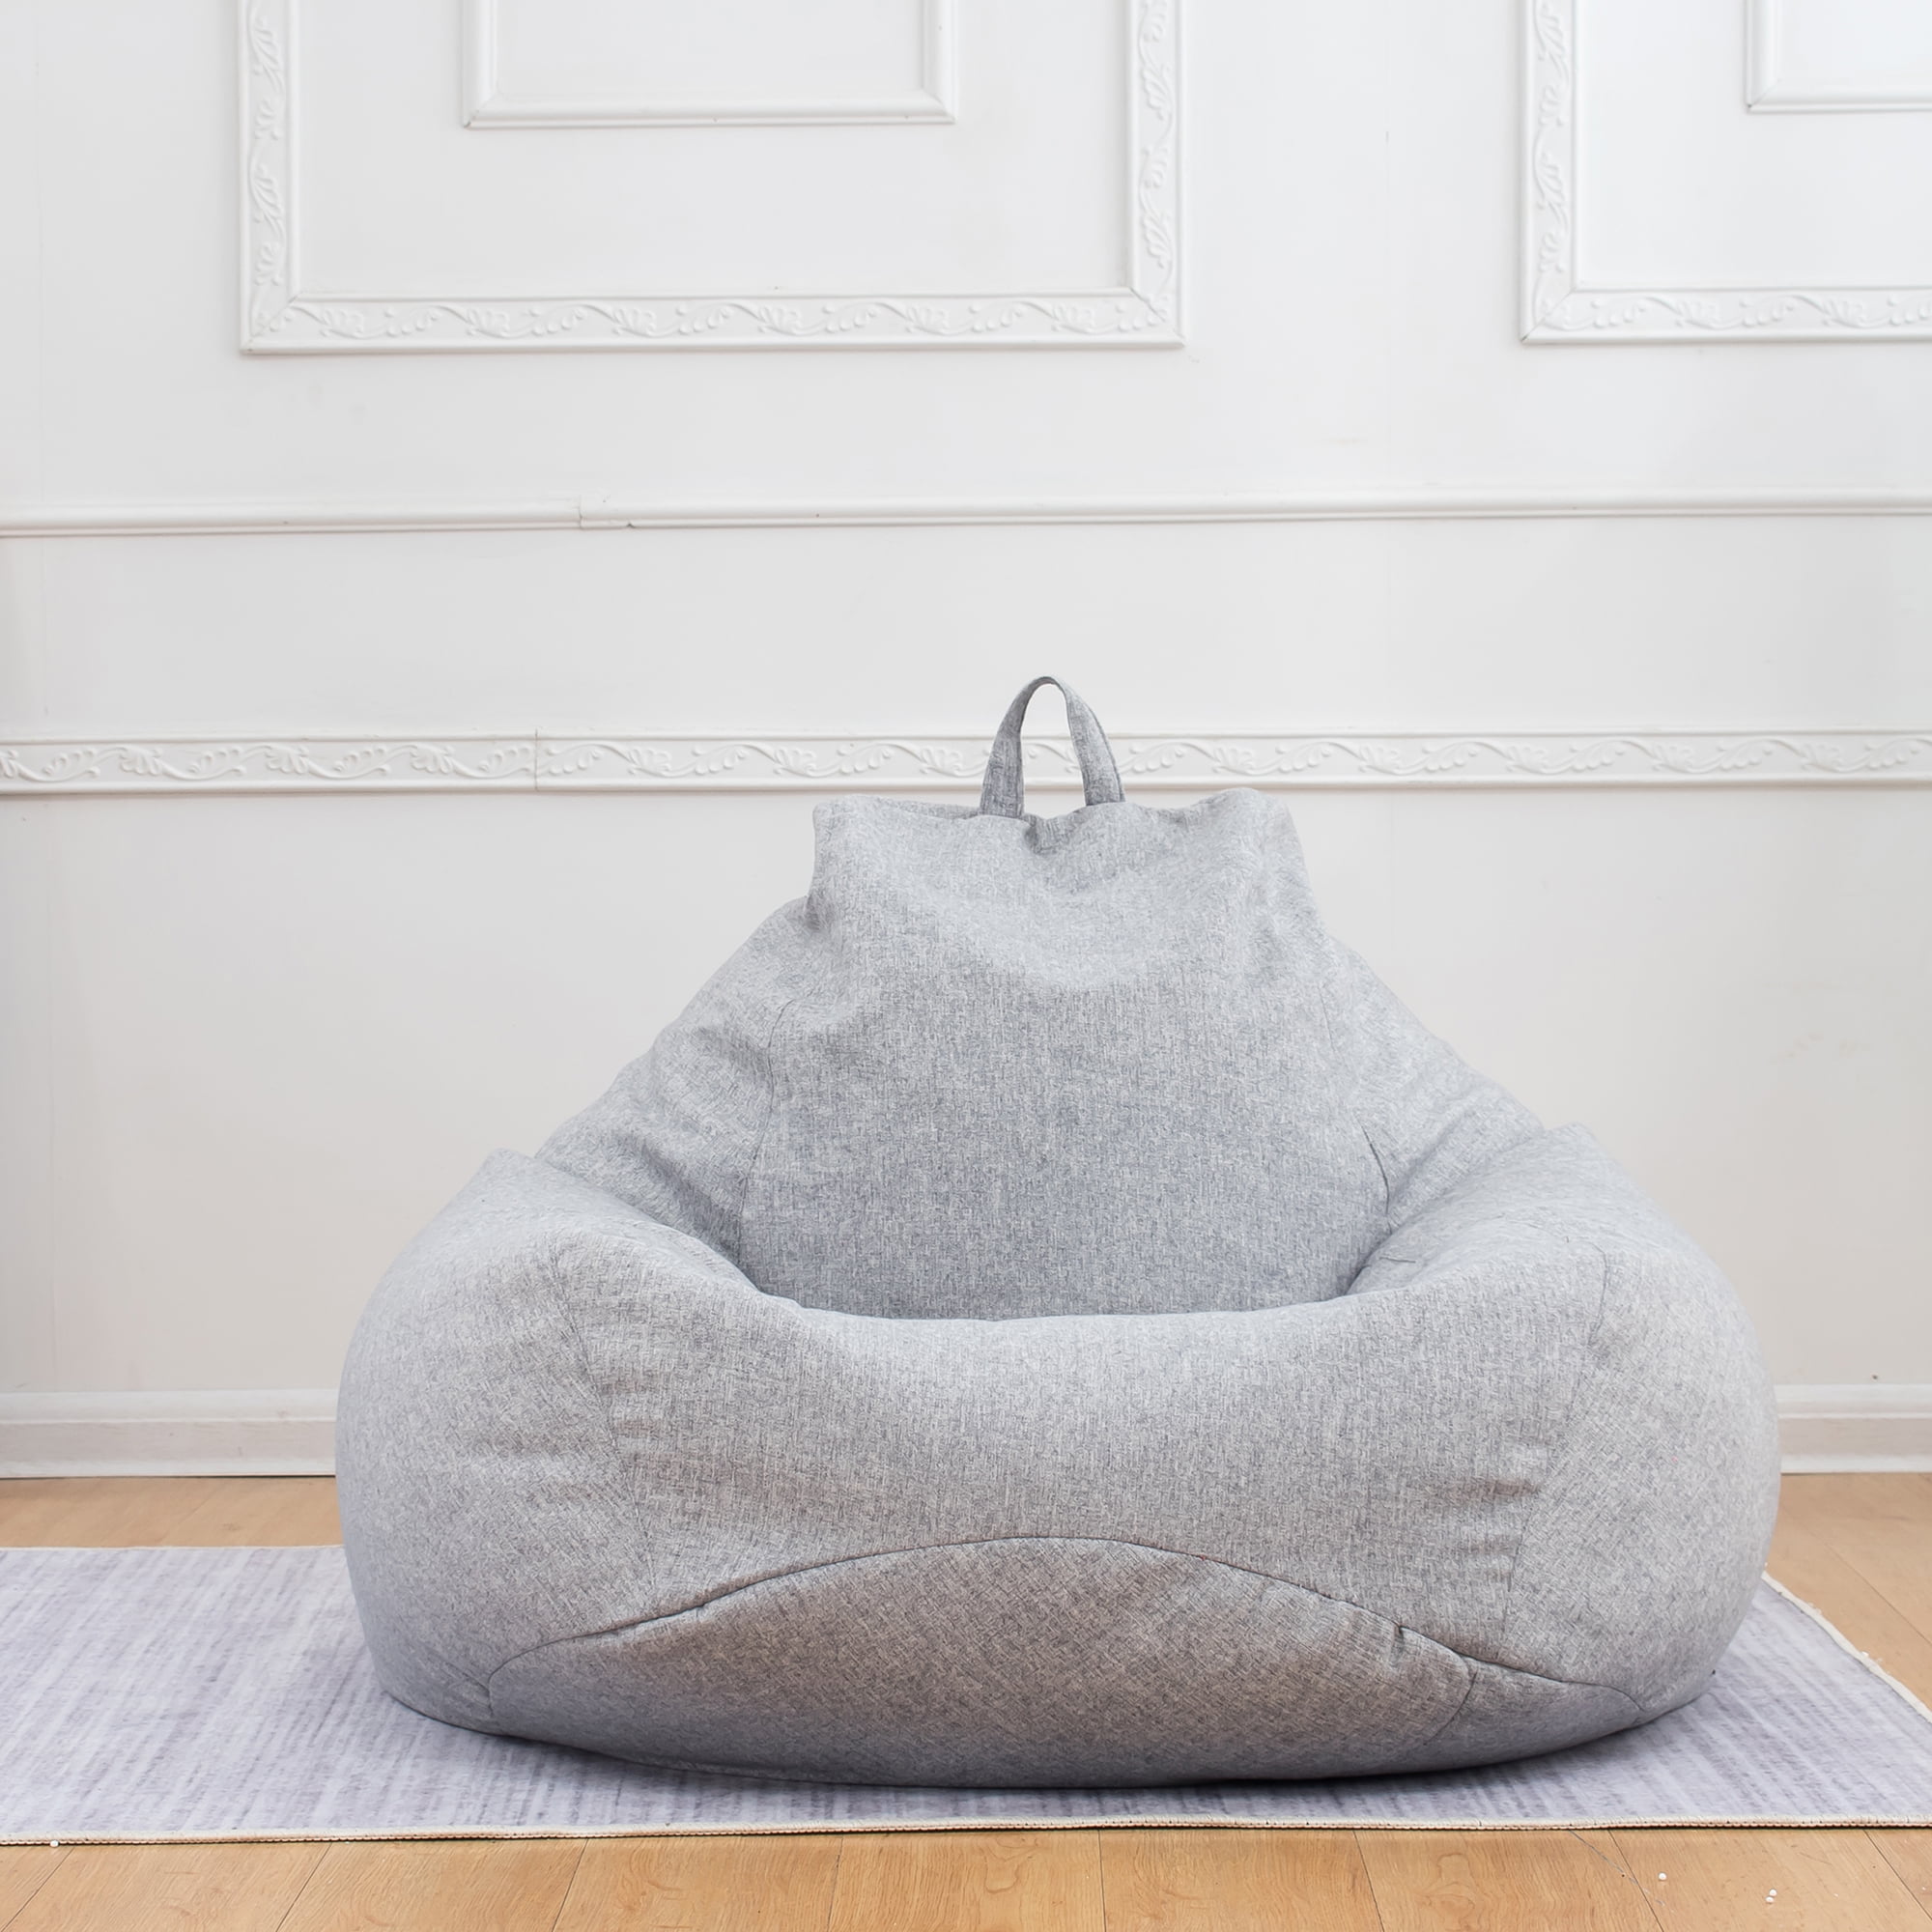 Lukery Bean Bag Chair for Adults (No Filler), Minimalism Bean Bag Cover,  Stuffed Animal Storage Bean Bag Chairs for Kids, 3D Comfy Bean Bags Cotton